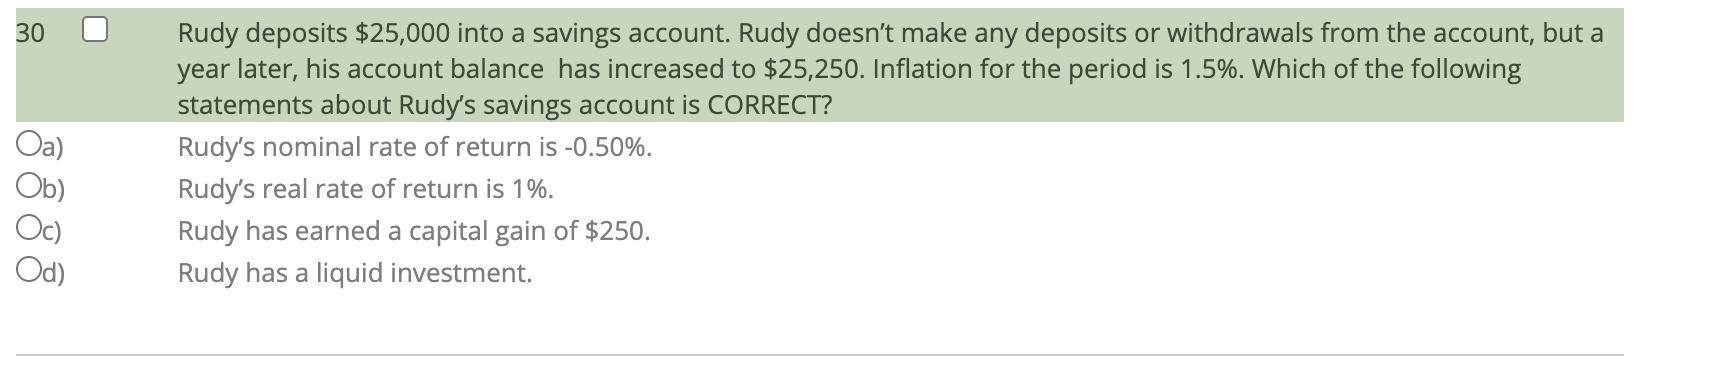 30 Oa) Ob) Oc) Od) Rudy deposits $25,000 into a savings account. Rudy doesnt make any deposits or withdrawals from the accou